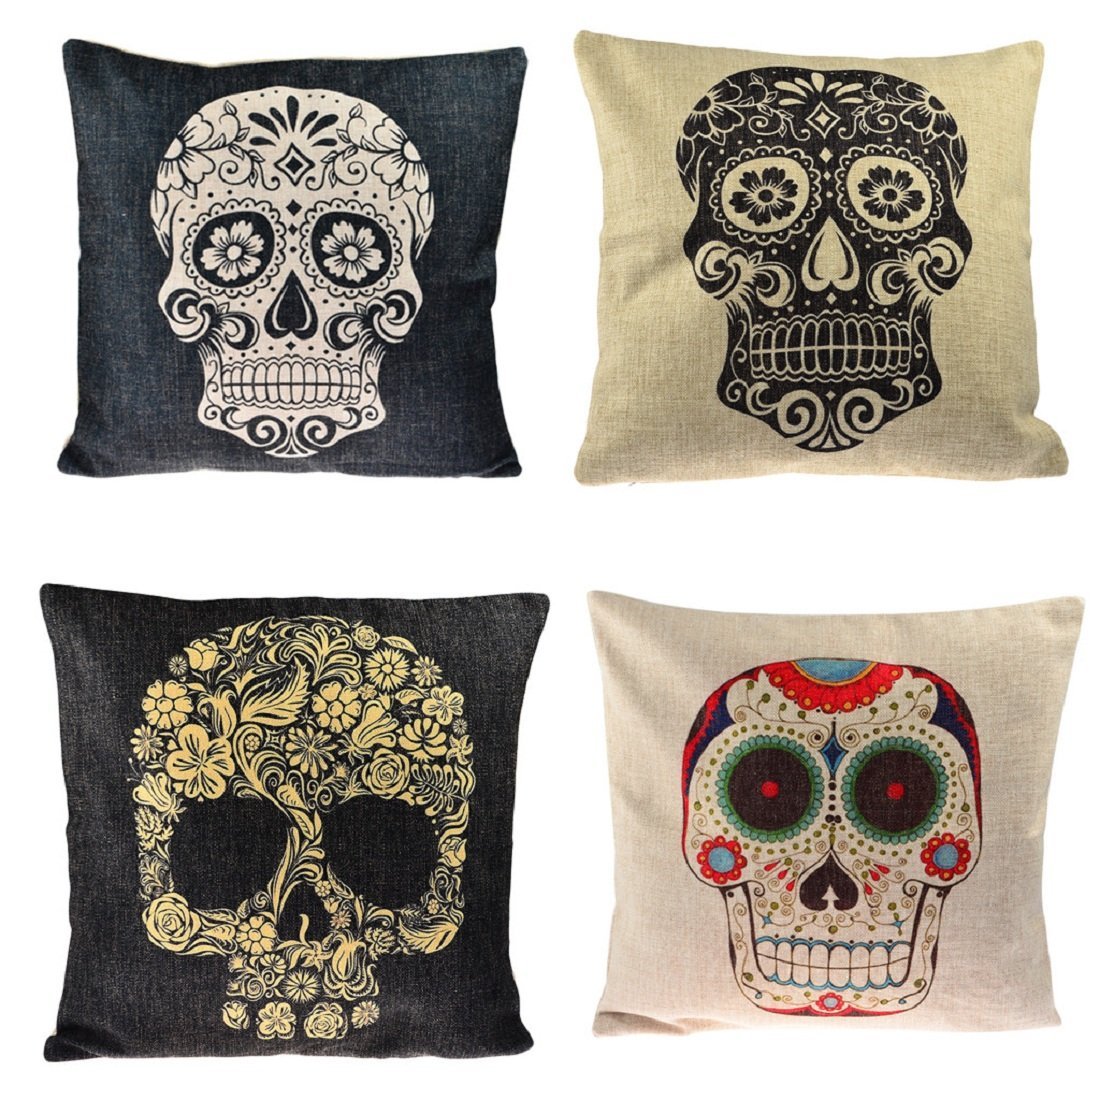 Throw Pillow Covers,YIFAN 4Pcs Mexican Day of the Dead Sugar Skull Cotton Linen Square Shaped Decorative Sofa Chair Couch Pillowcase Pillowslip 43*43cm